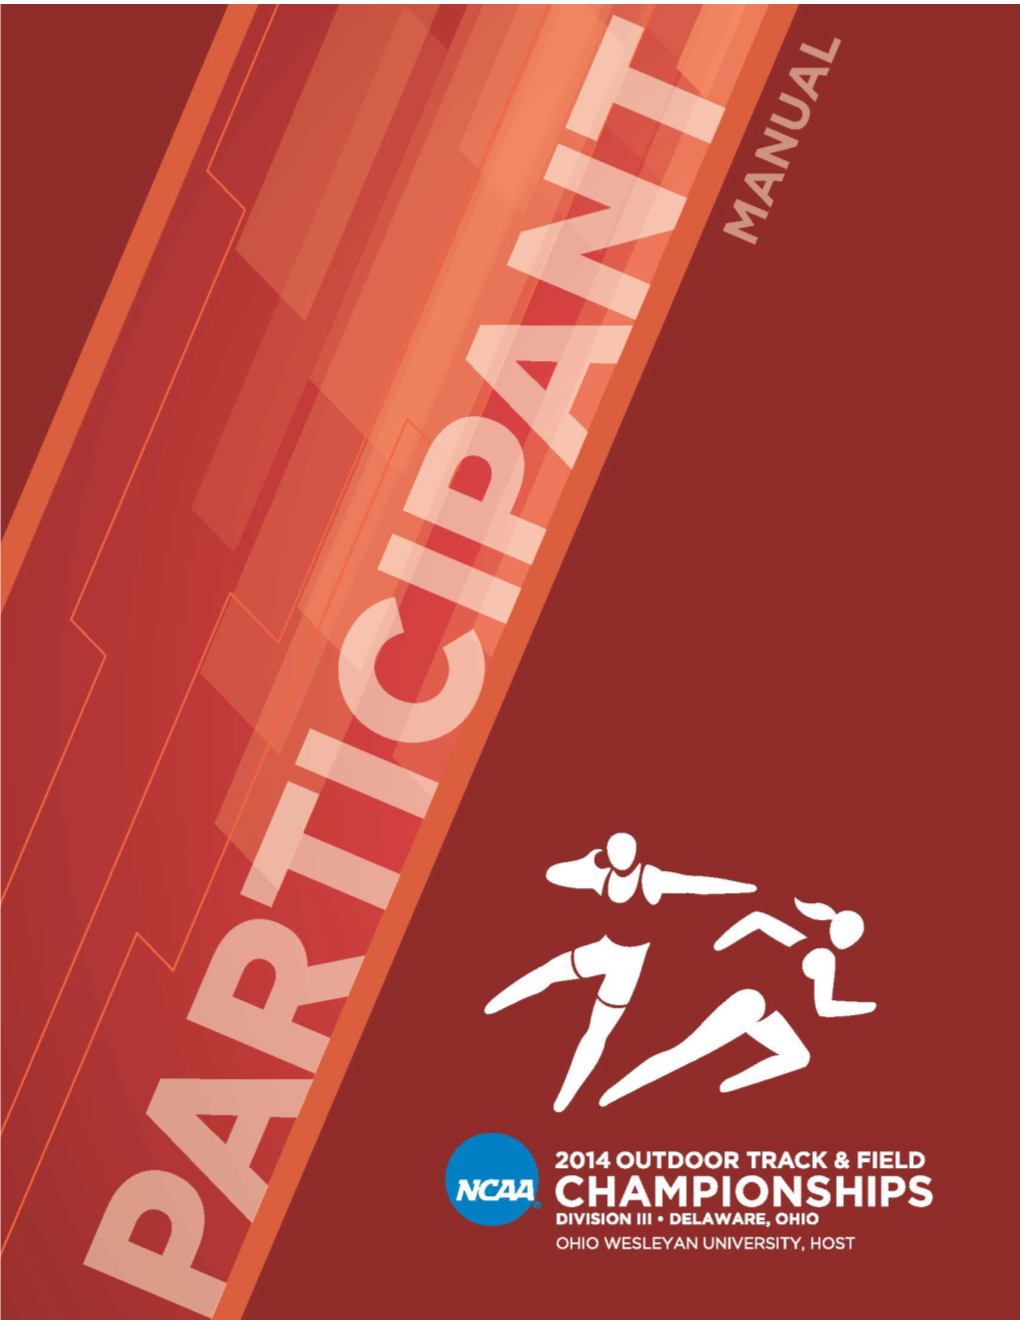 Participant Manual Will Be Helpful As a Guide to the Policies and Procedures Governing the Administration and Conduct of This Championship Event